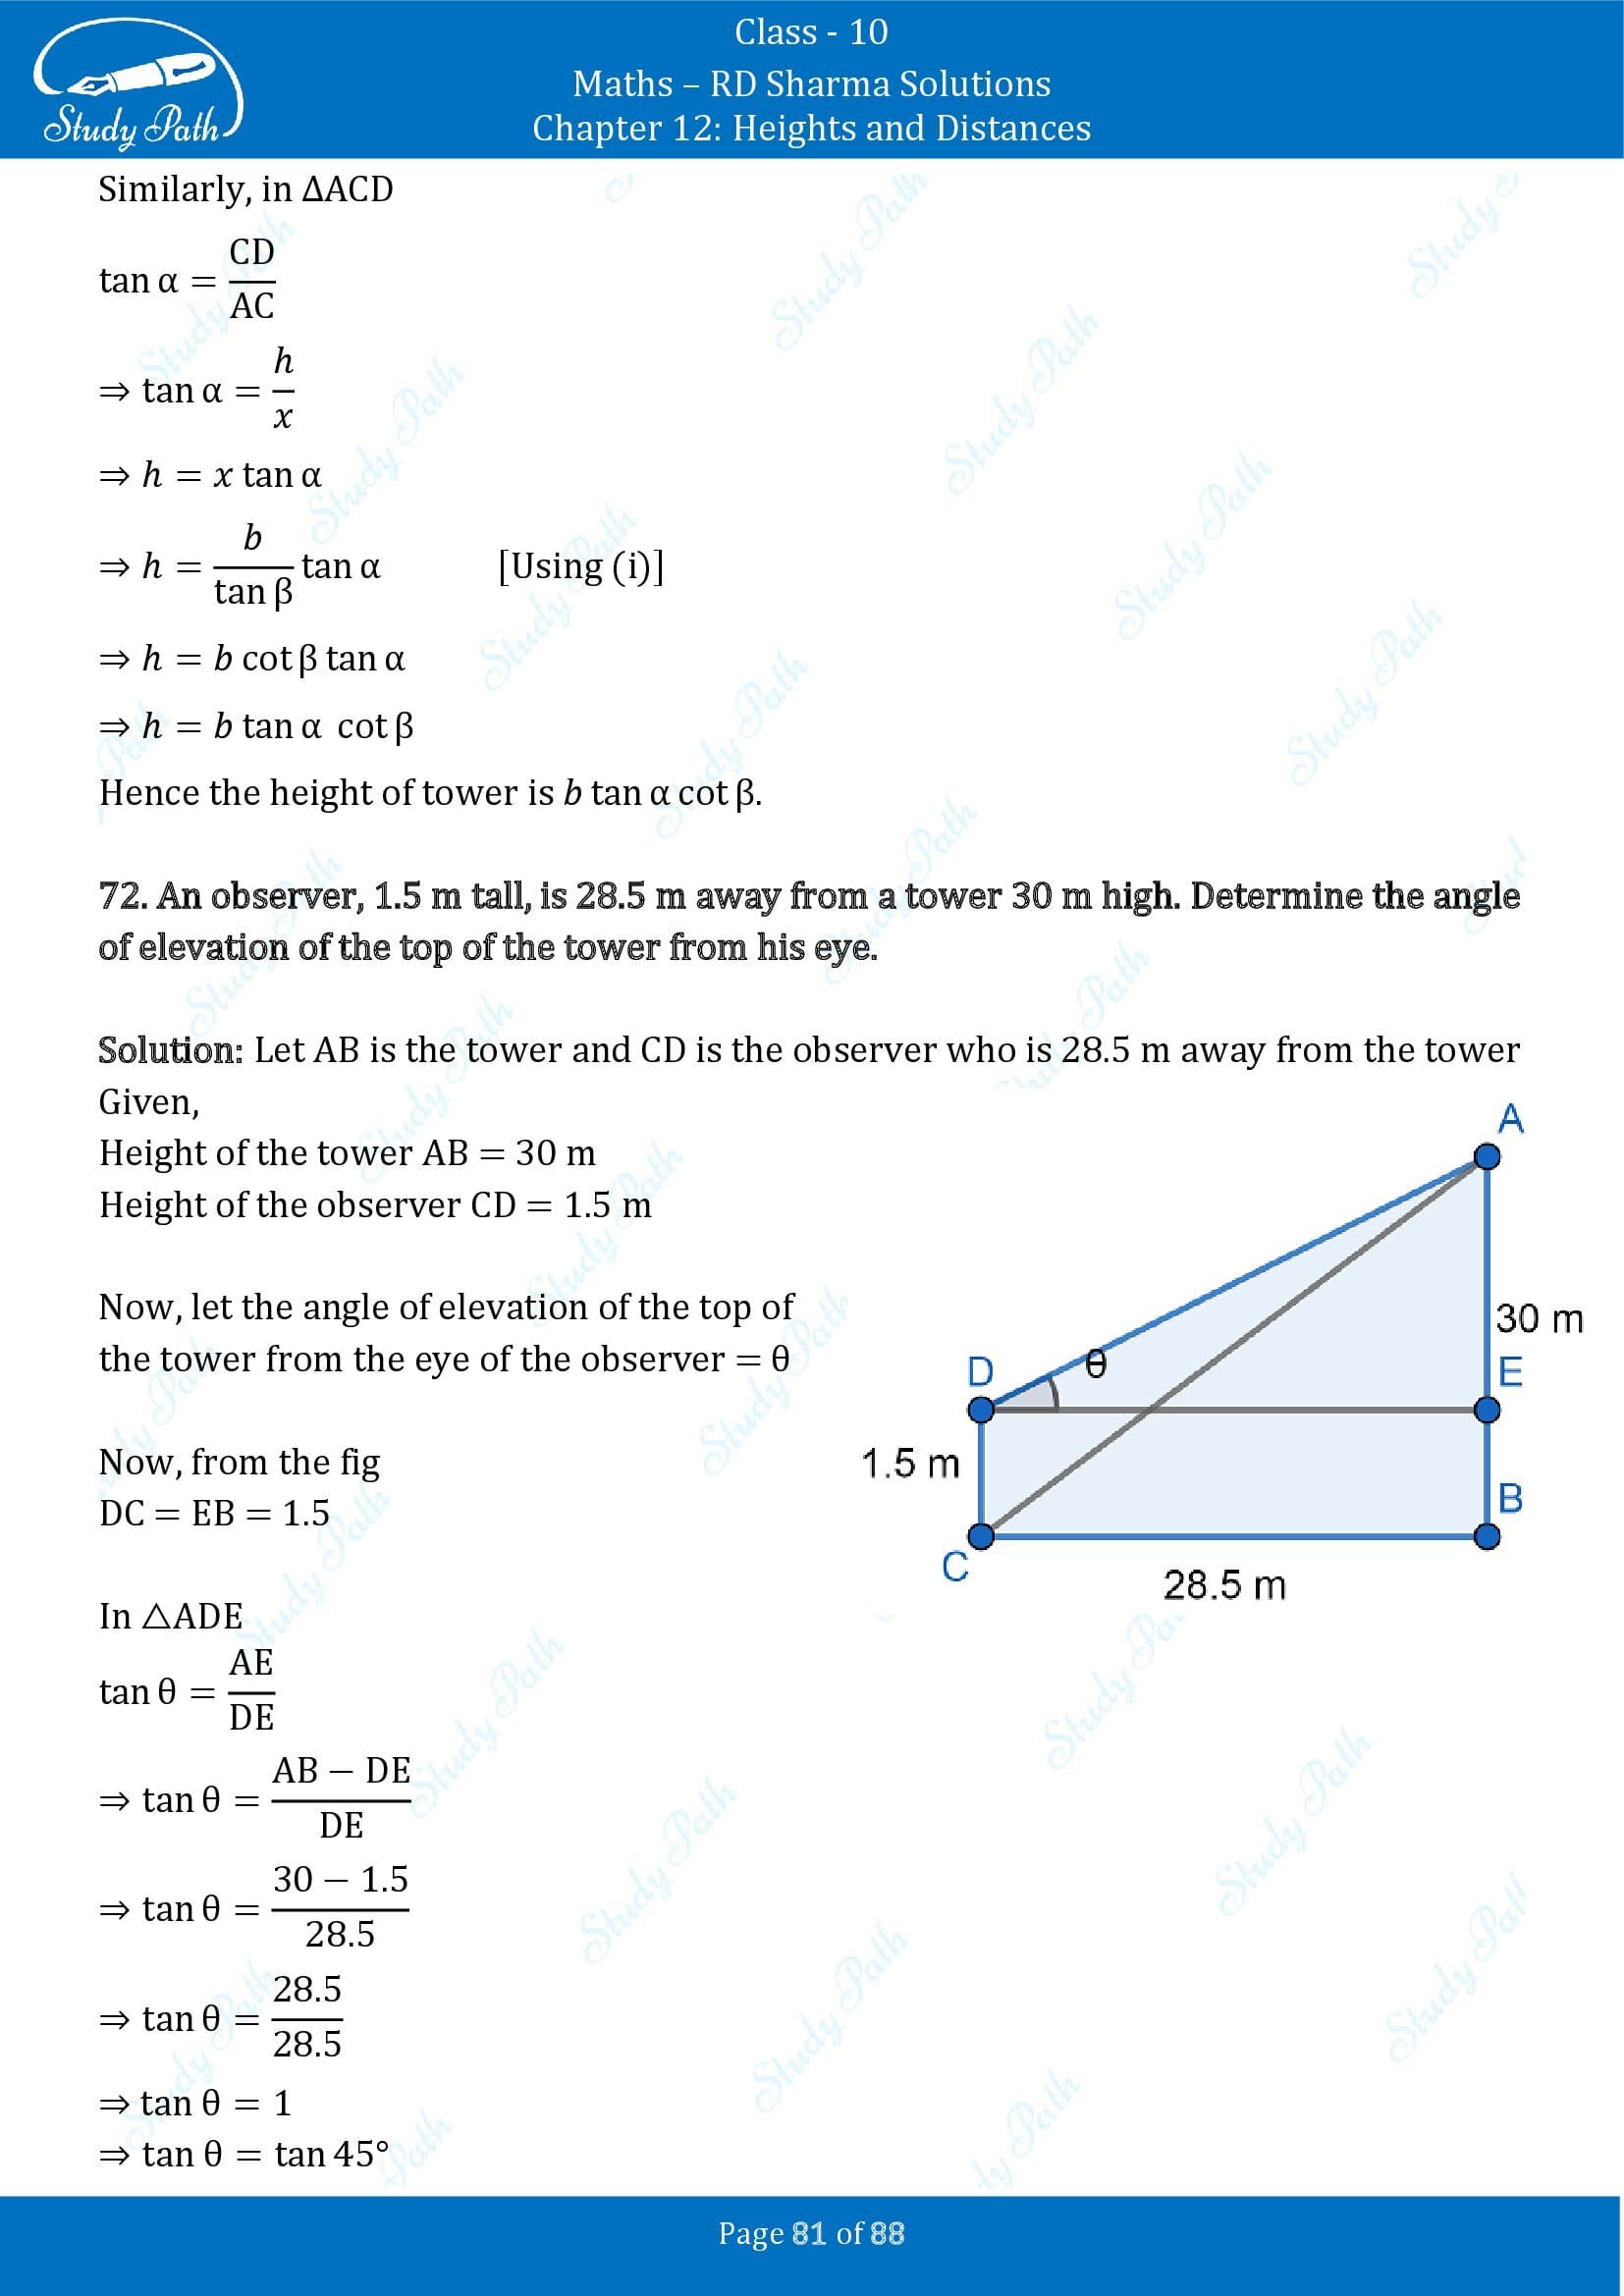 RD Sharma Solutions Class 10 Chapter 12 Heights and Distances Exercise 12.1 00081